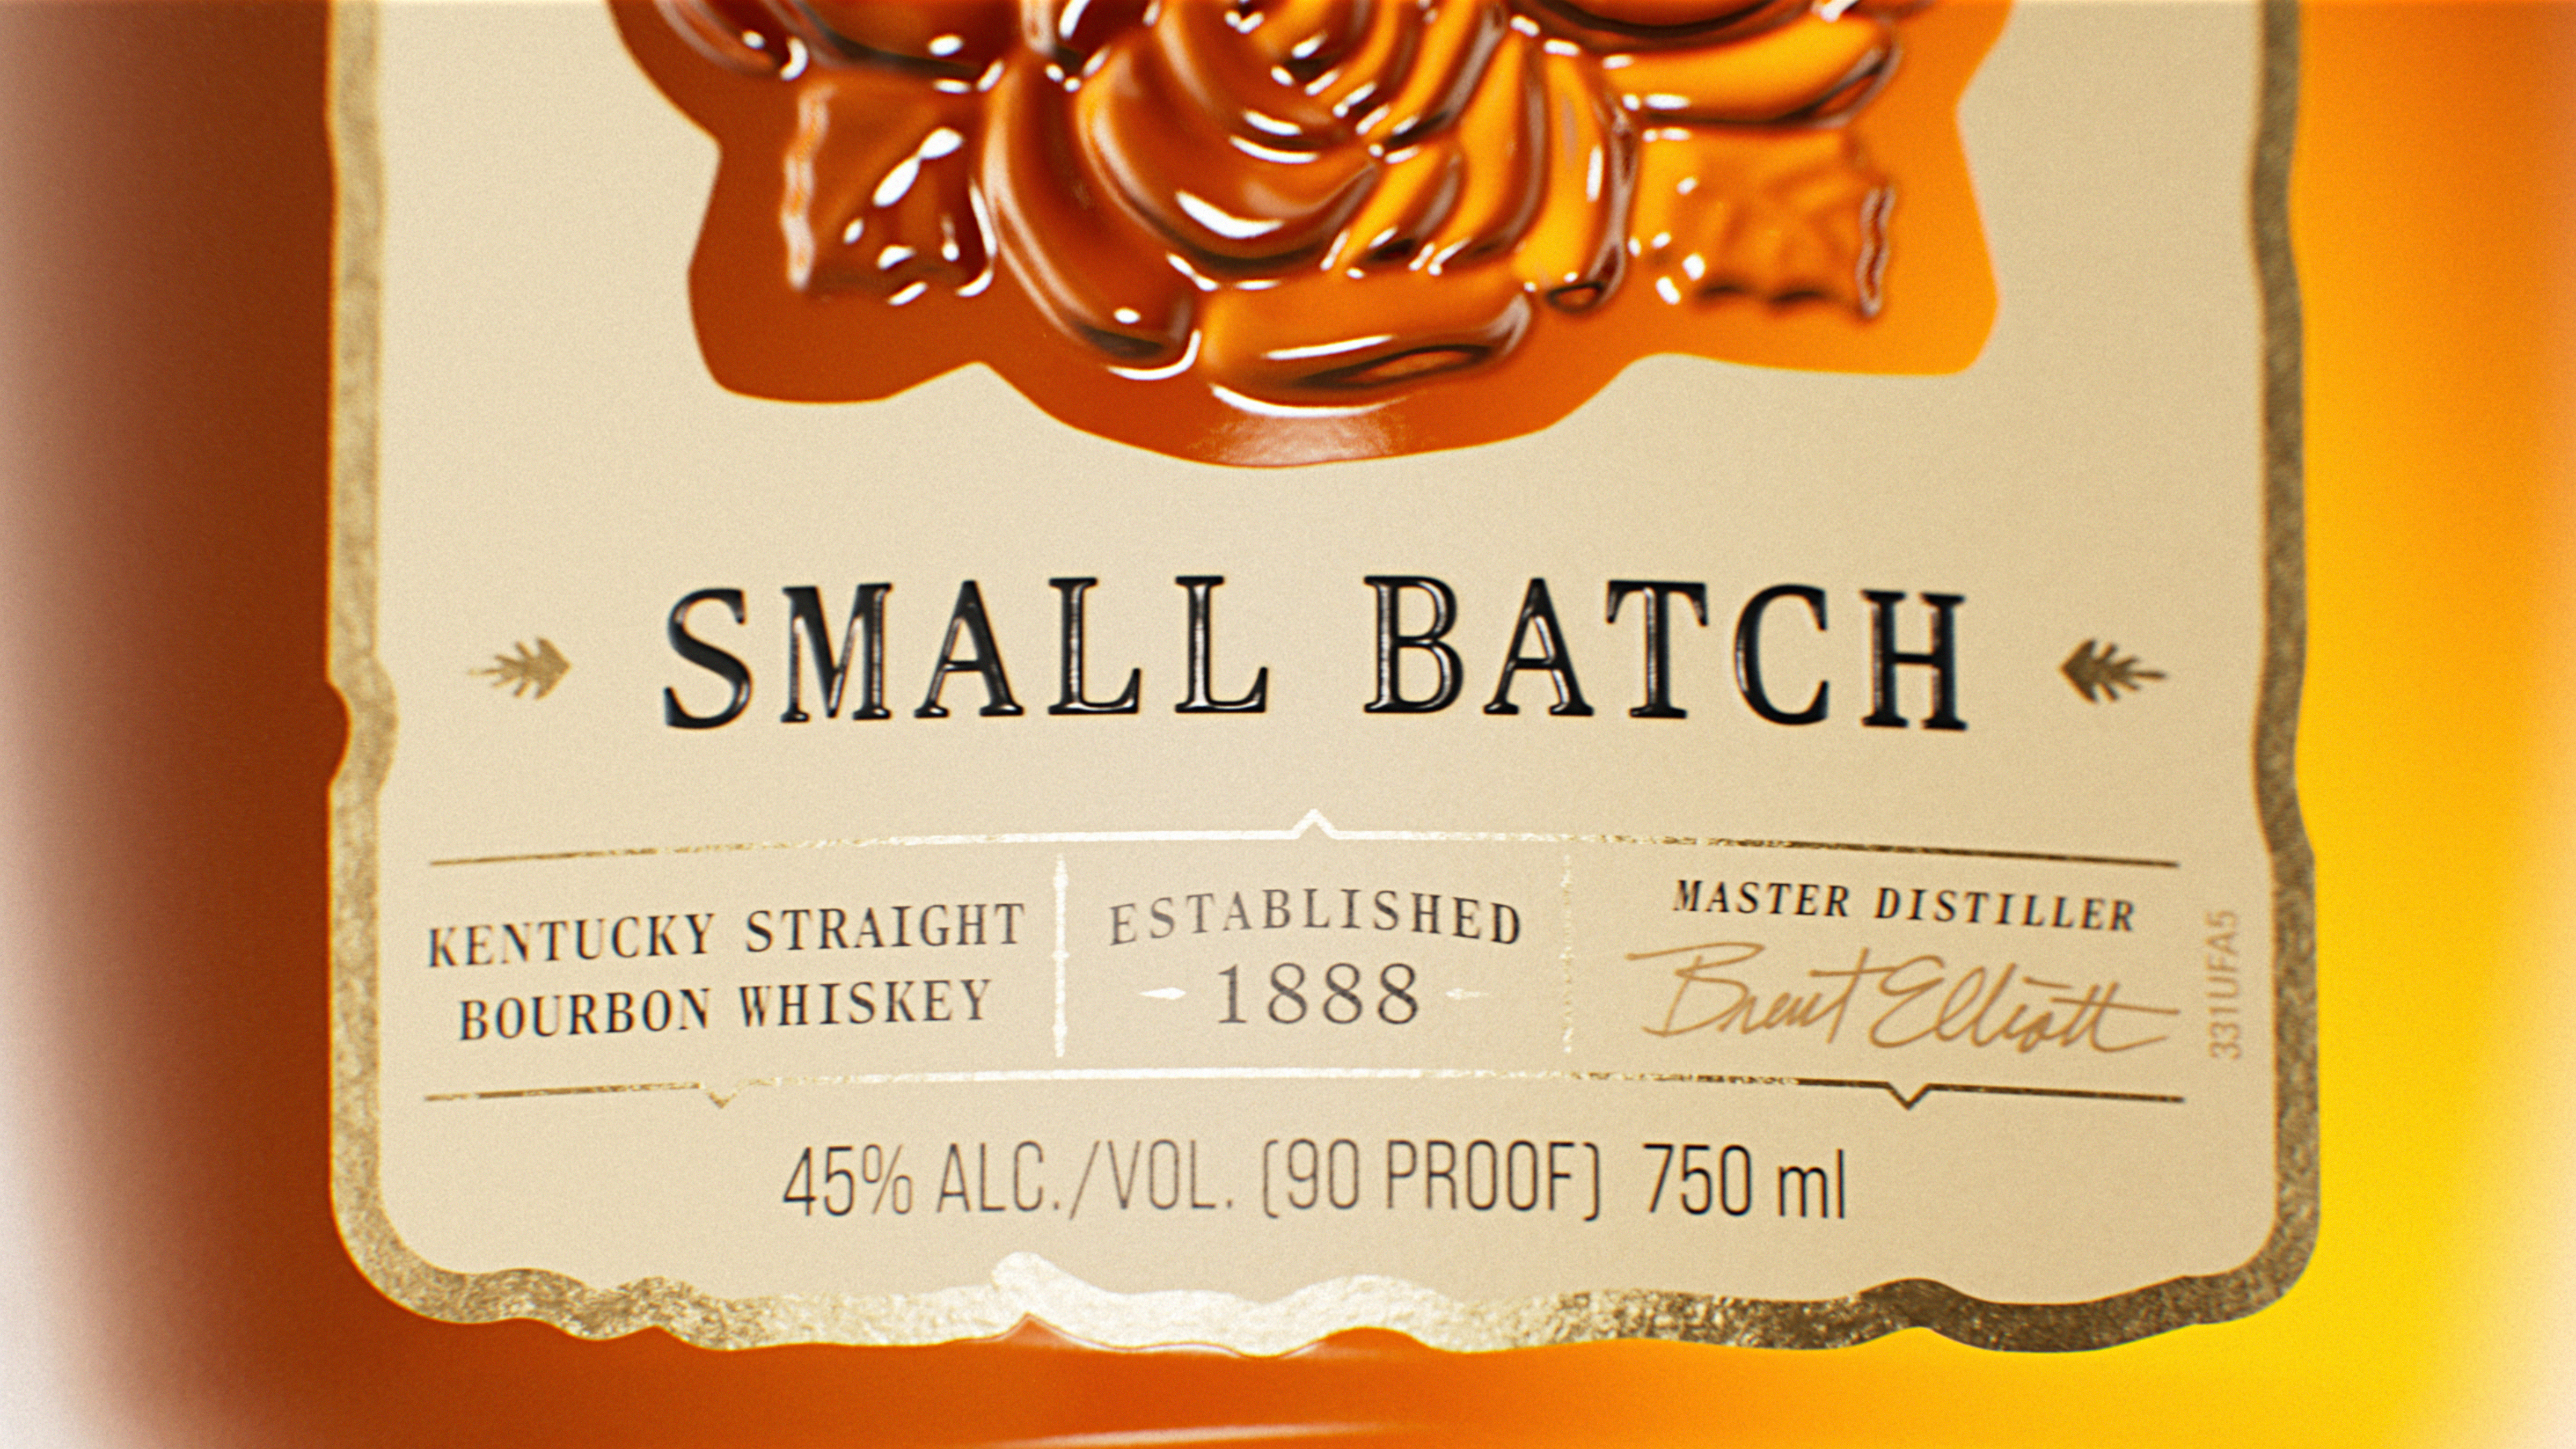 Close-up of Small Batch label details